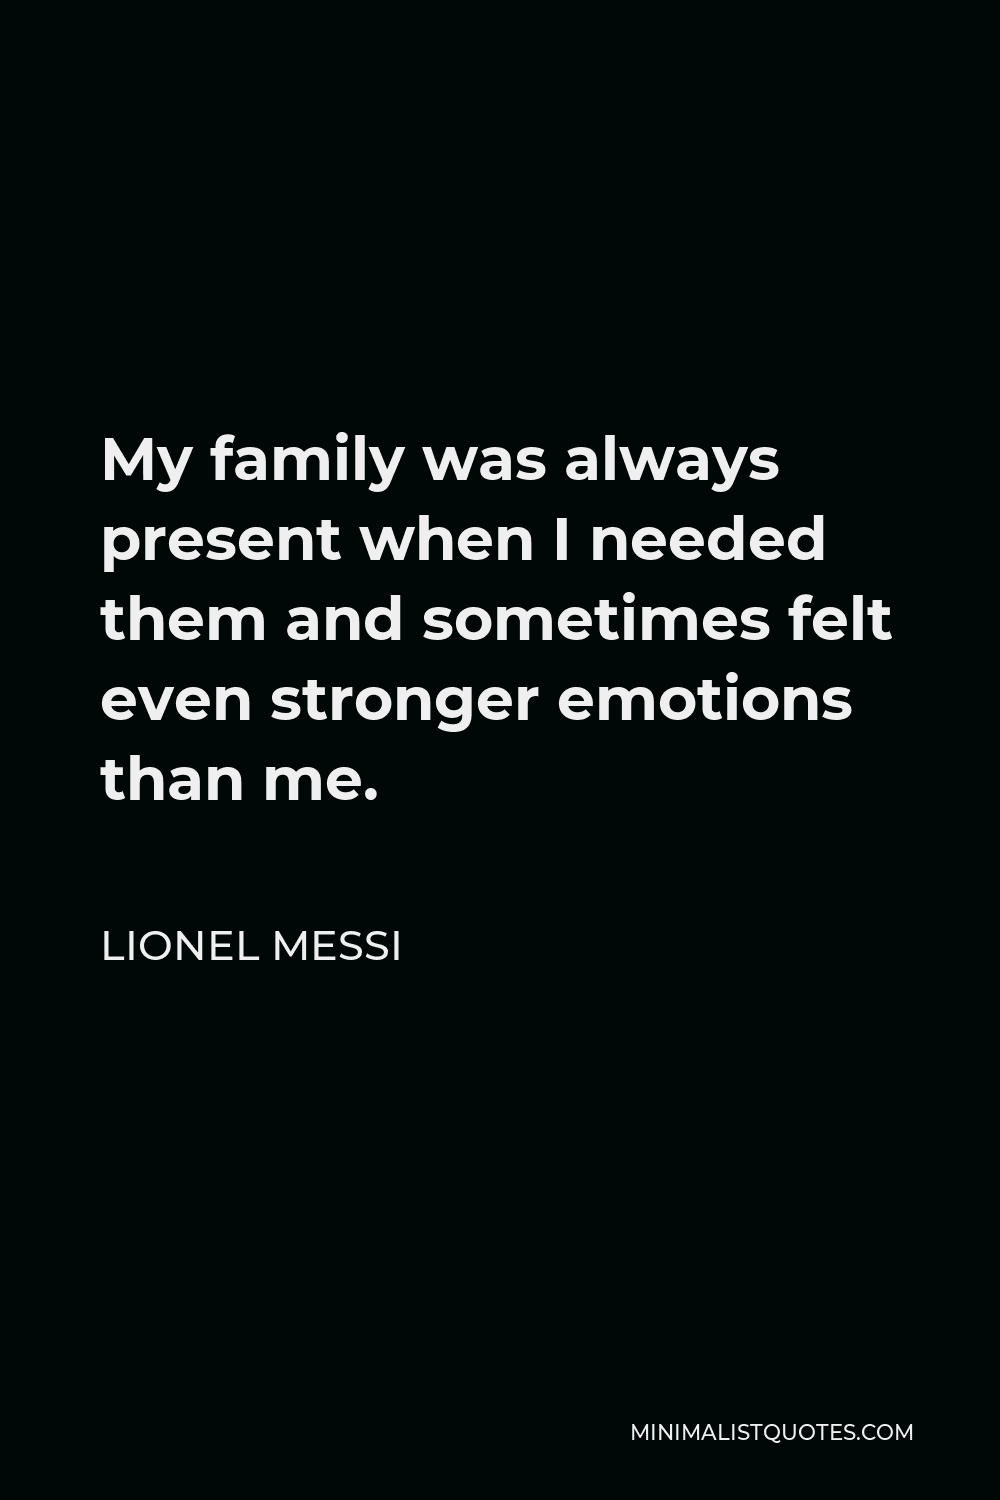 Lionel Messi Quote - My family was always present when I needed them and sometimes felt even stronger emotions than me.